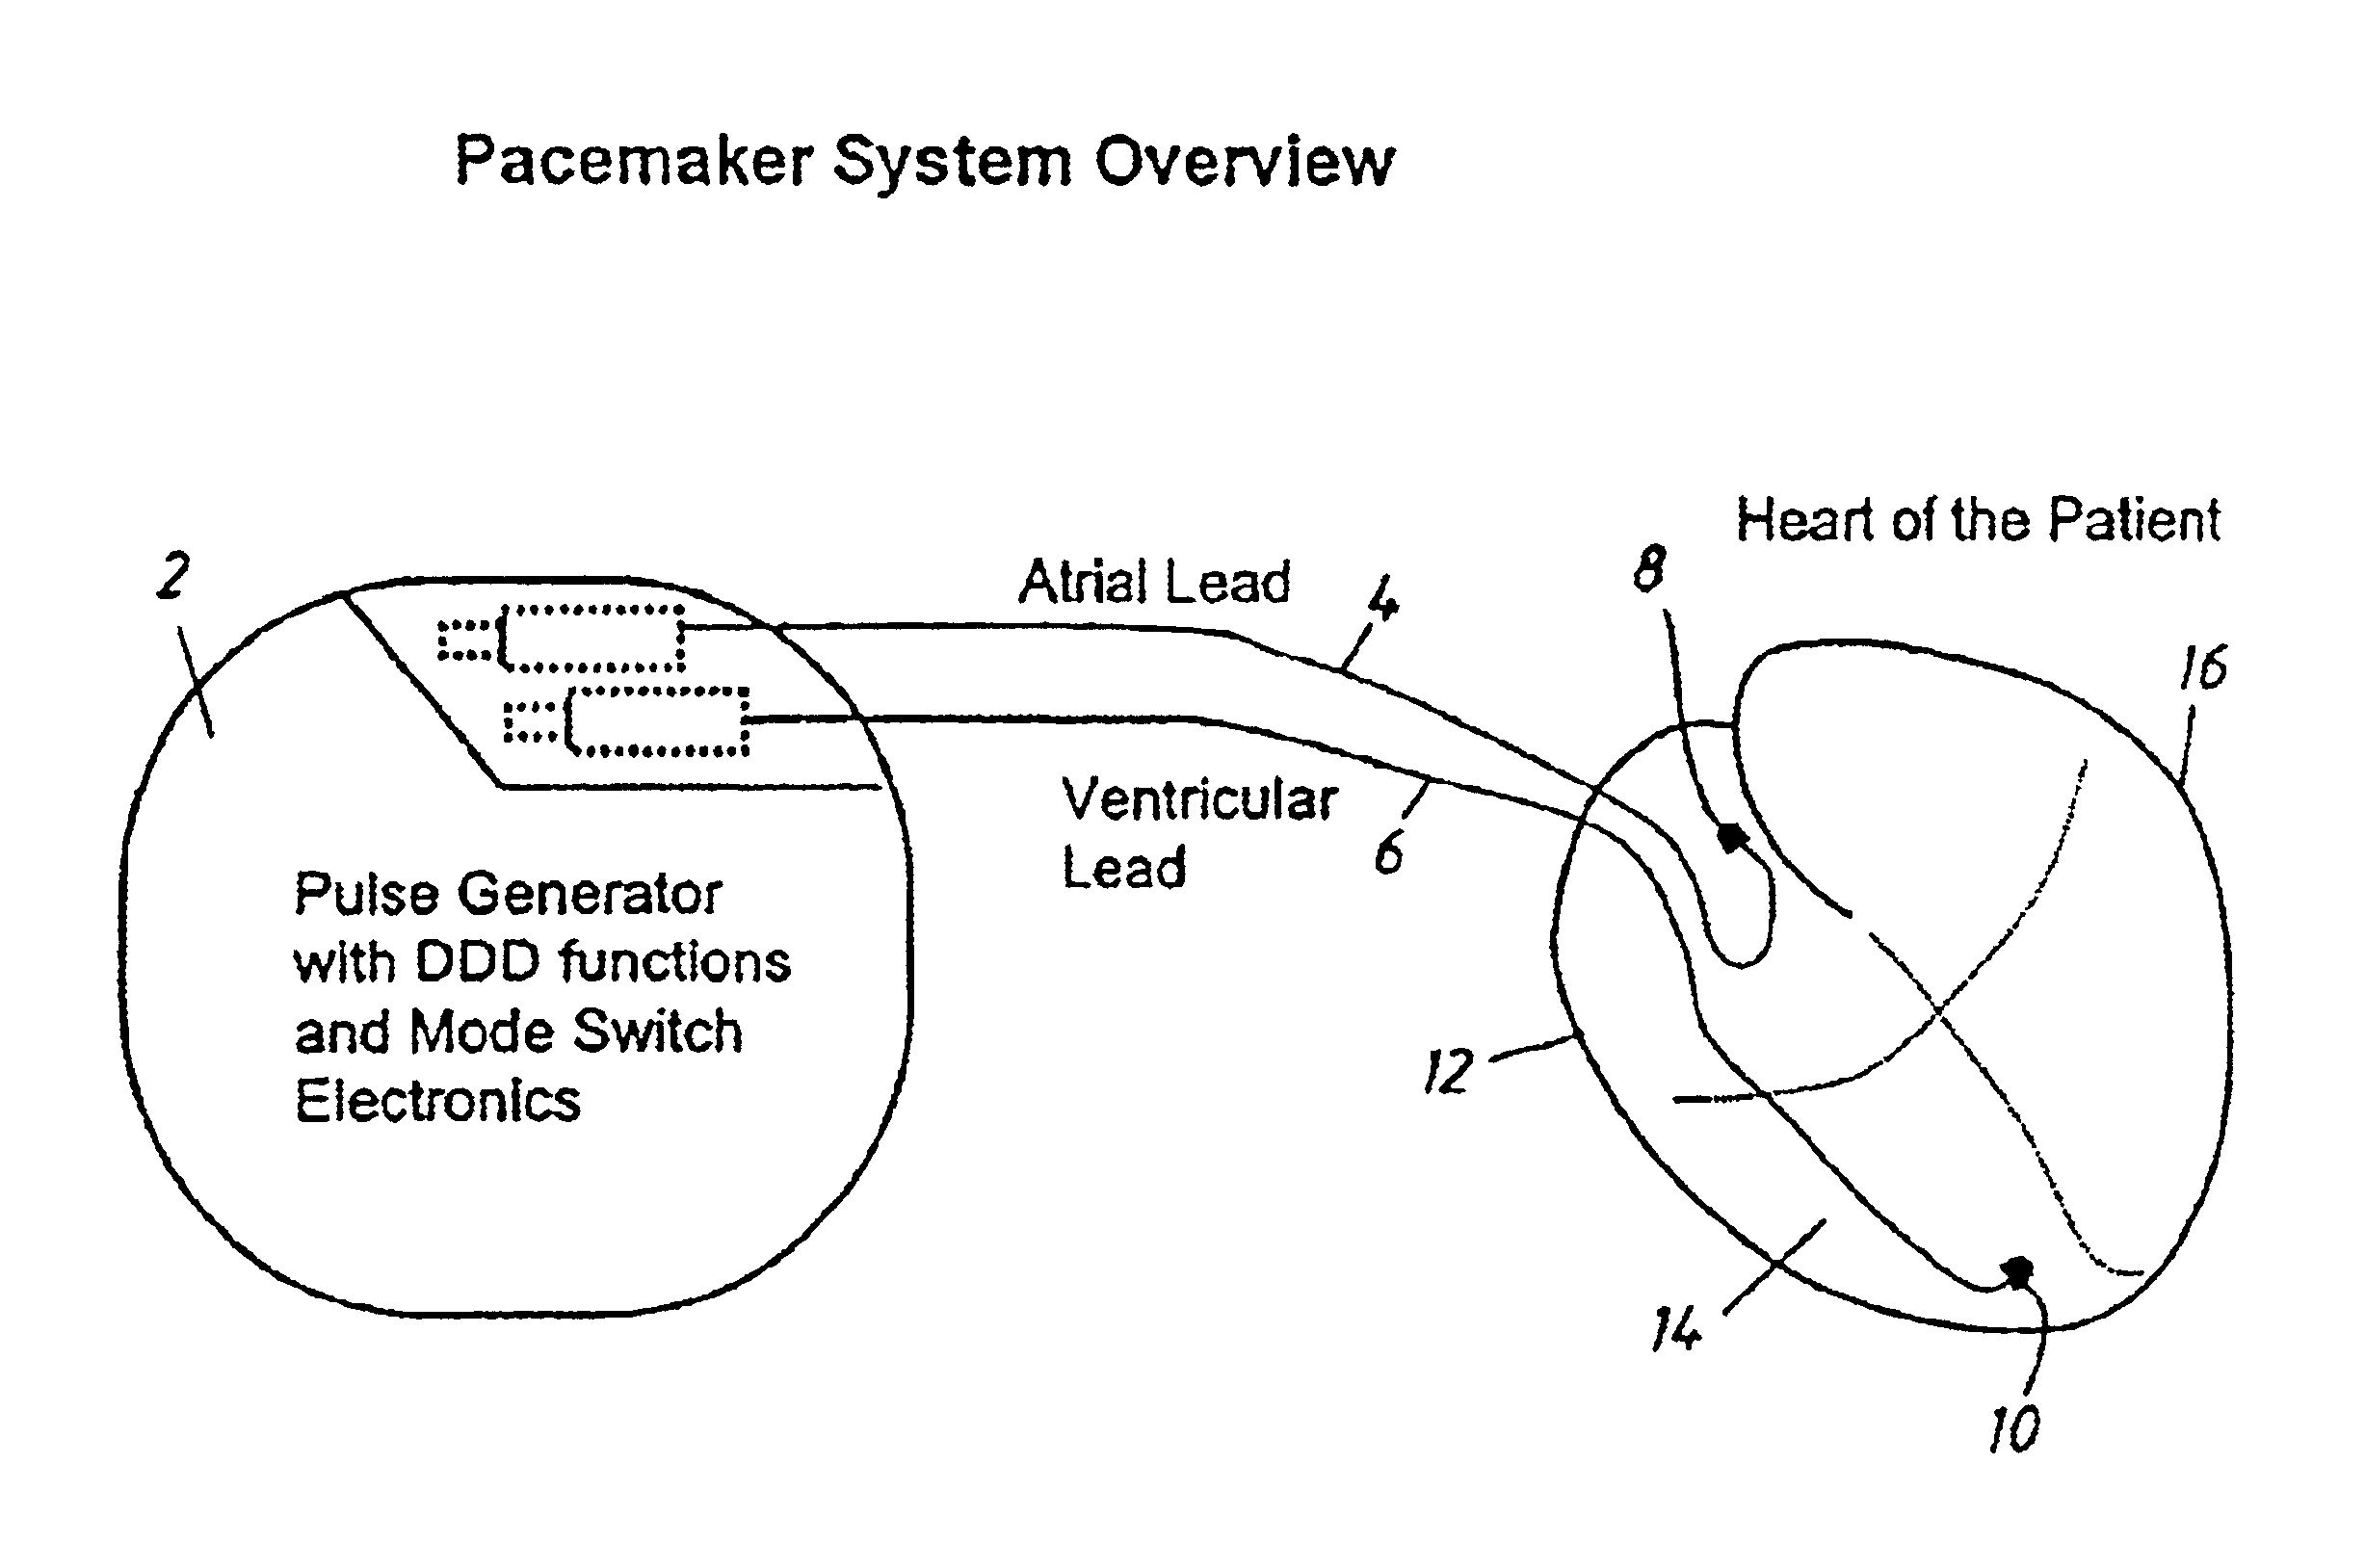 Pacemaker using measured intervals for mode switching